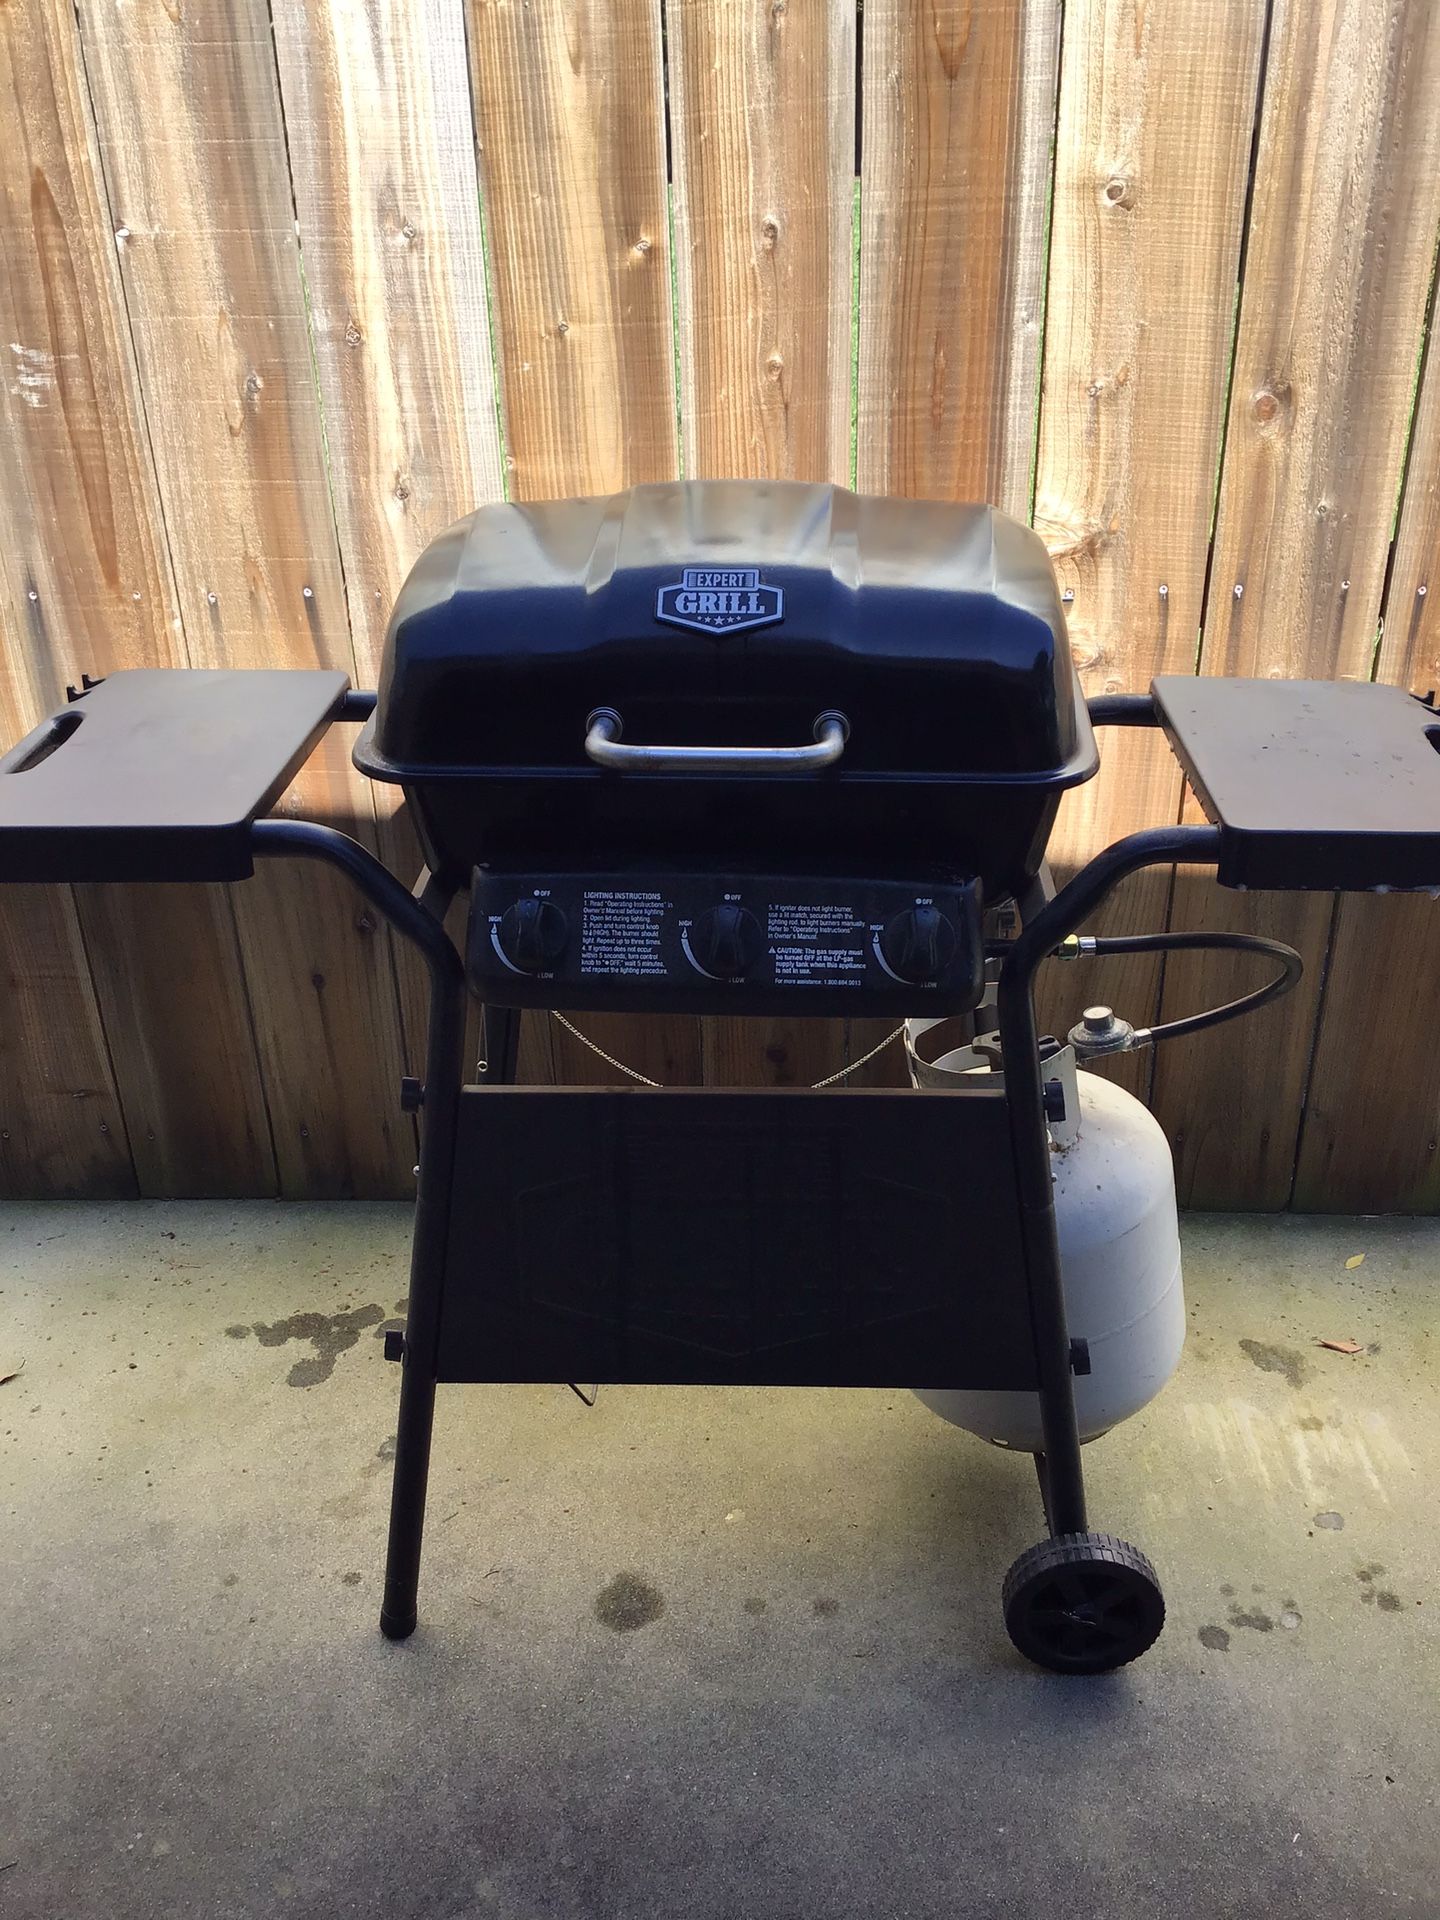 Bbq Grill And Propane Tank